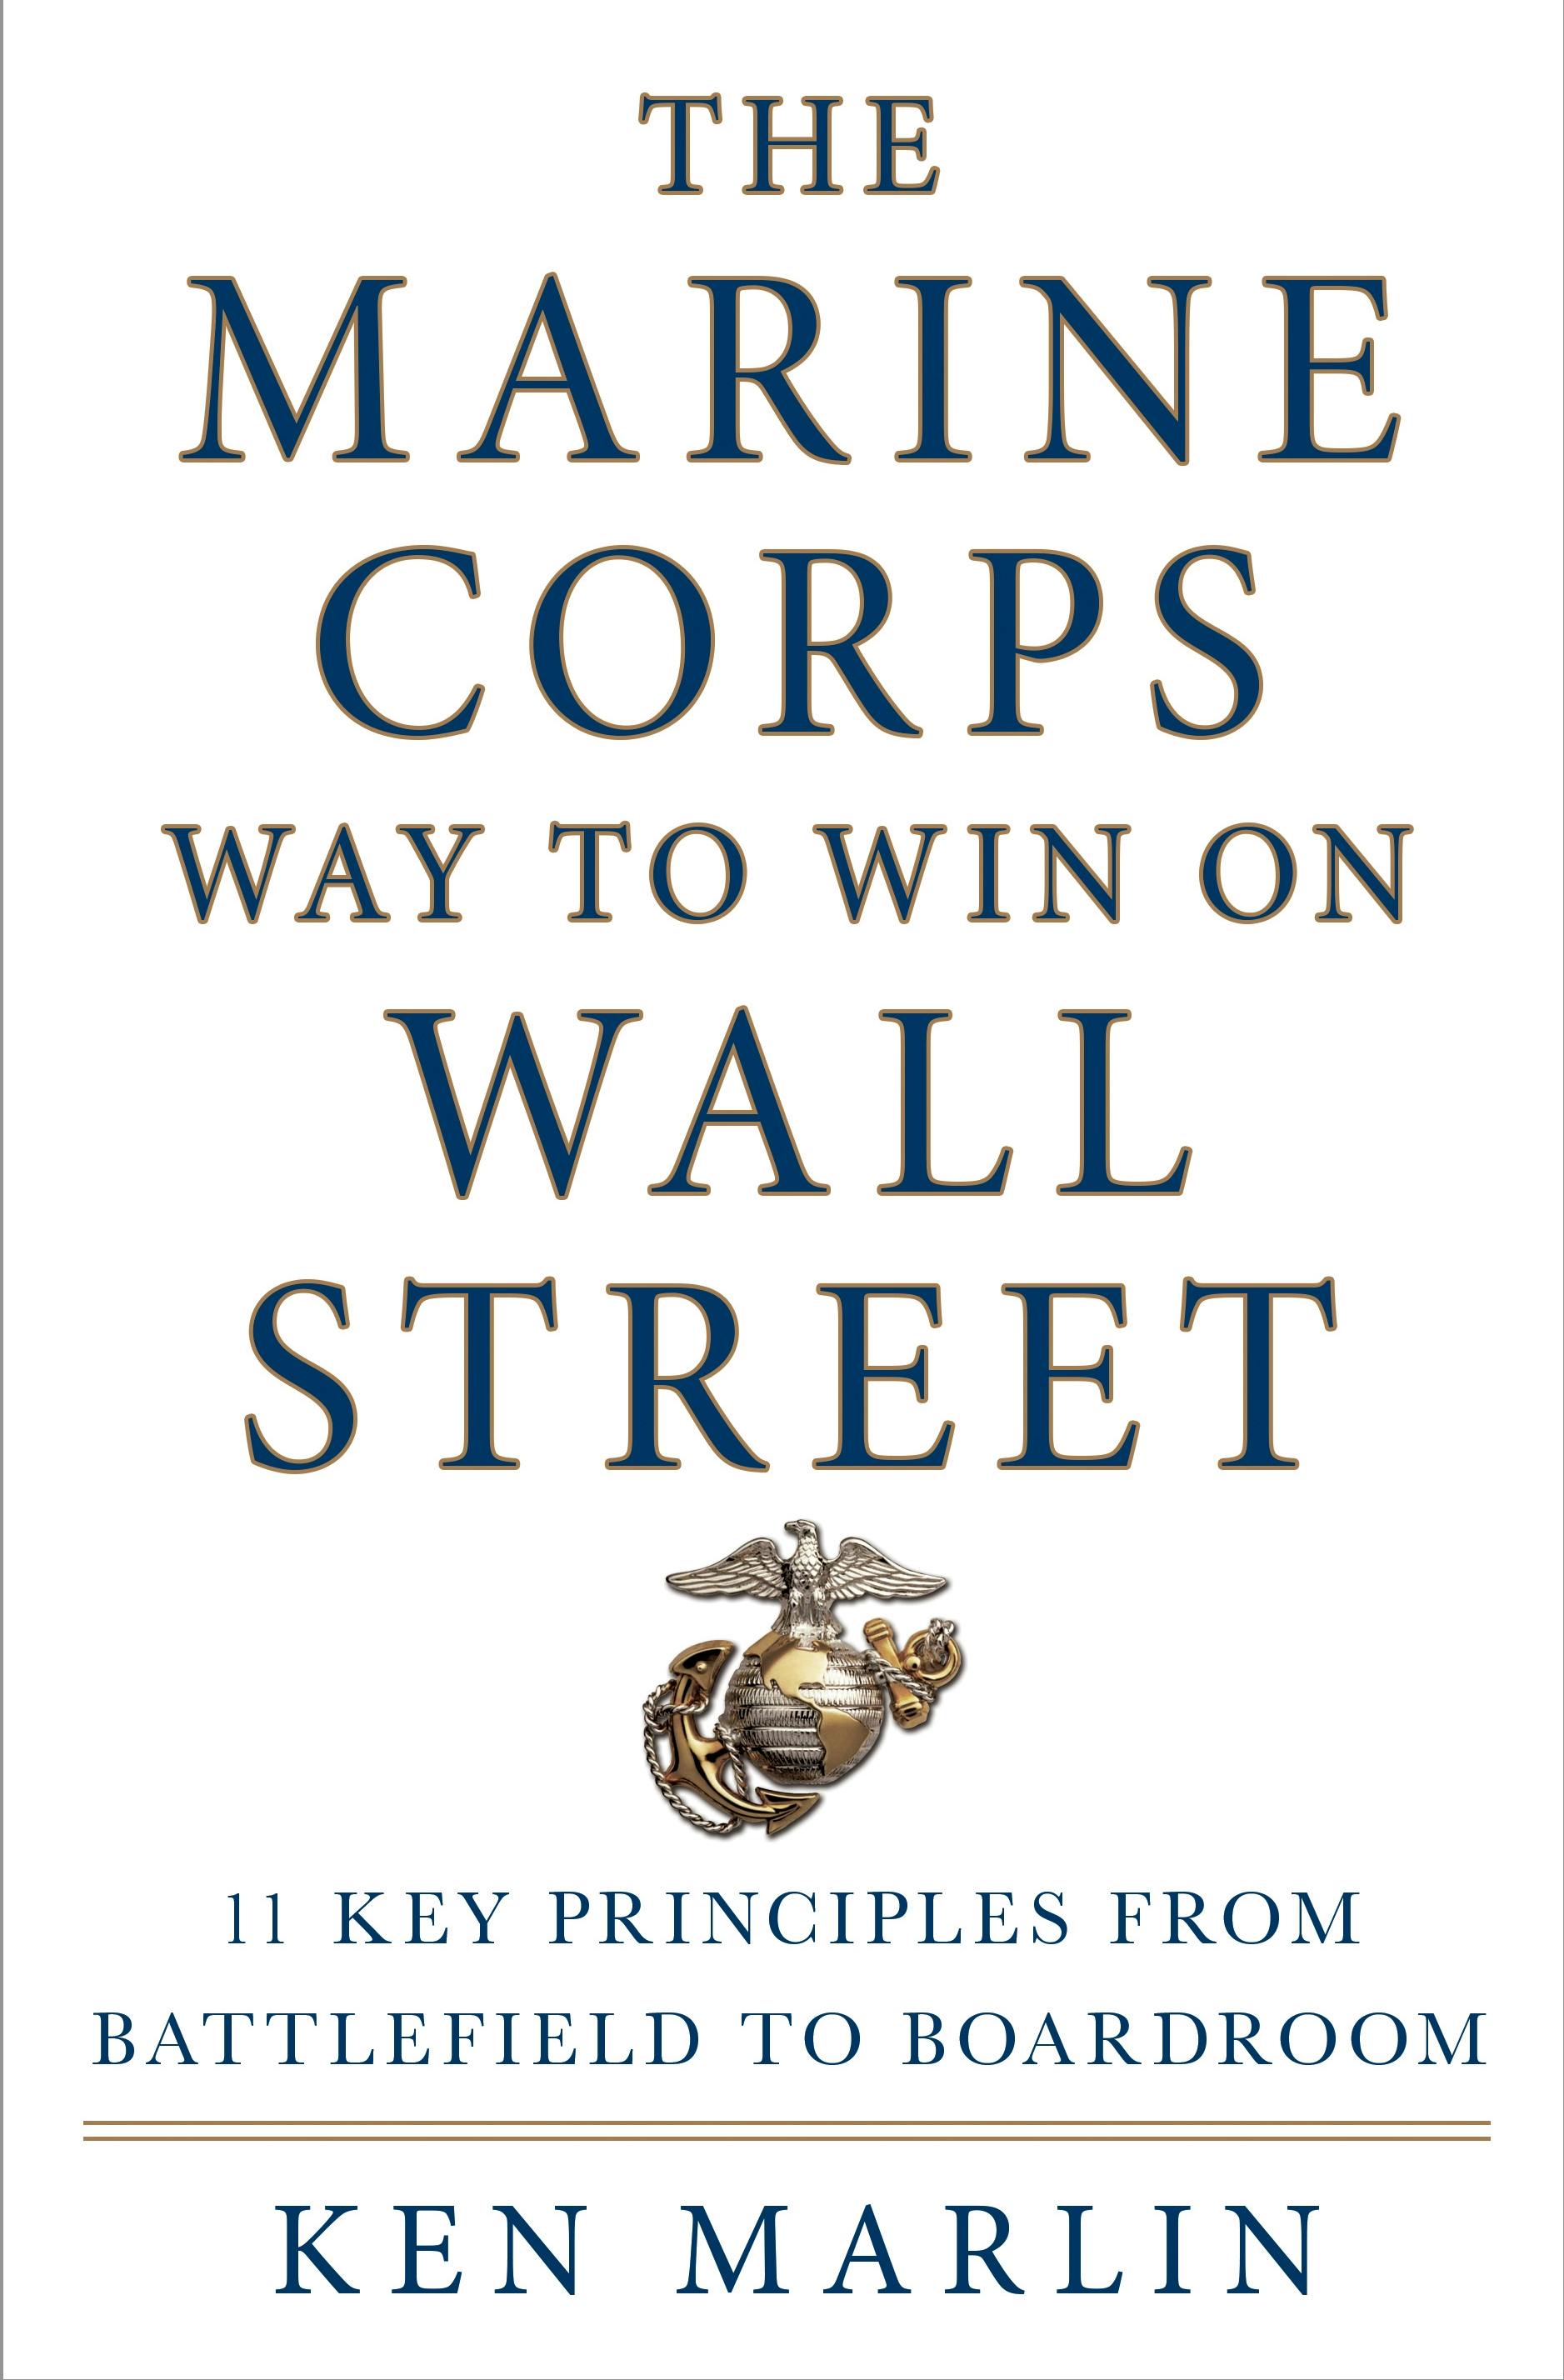 Describes for The Marine Corps Way to Win on Wall Street by authors